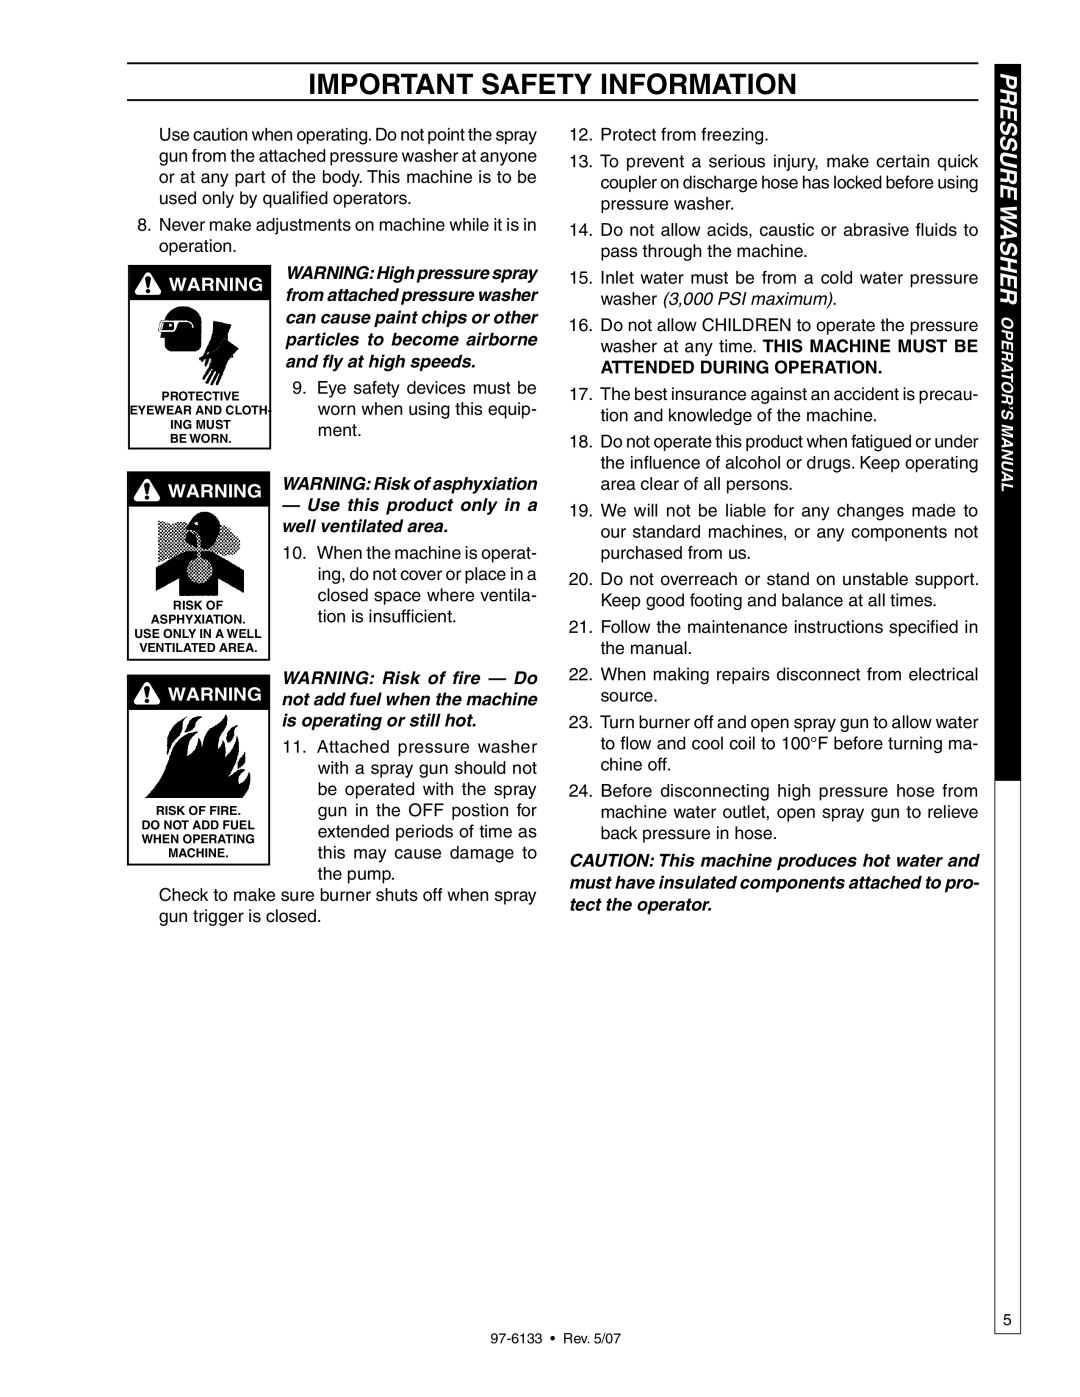 Shark HP-5030D manual Important Safety Information, Attended During Operation 